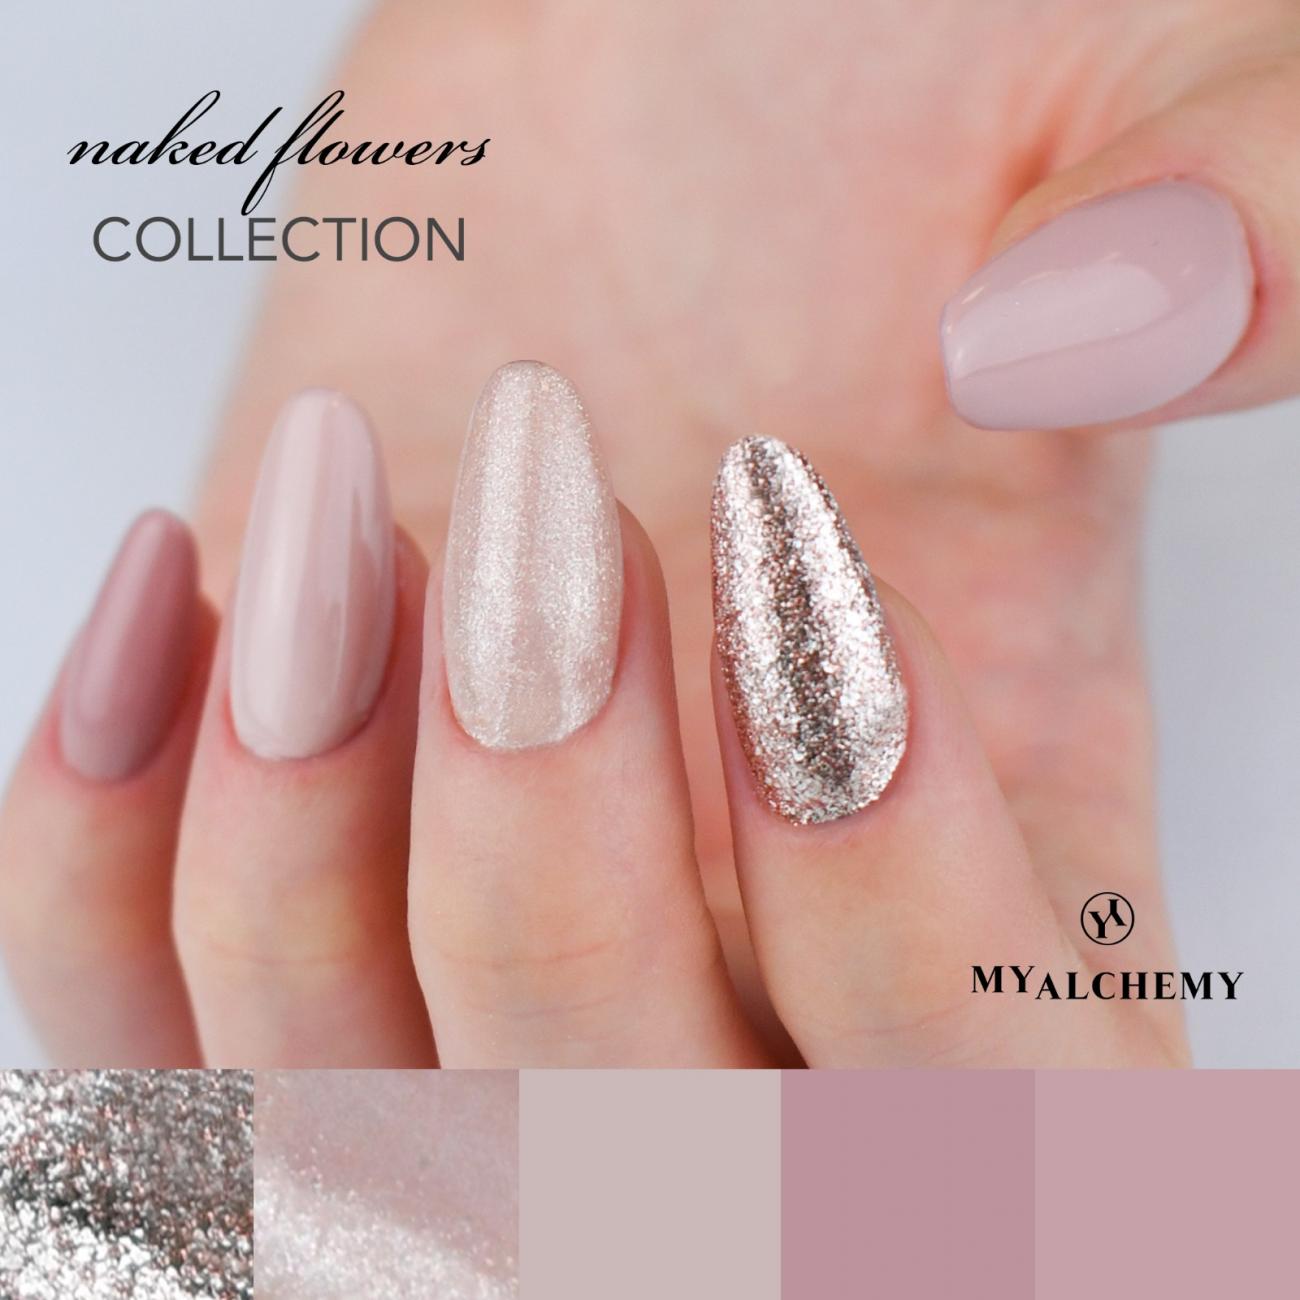 Naked Flowers - Alchemy Color Collection